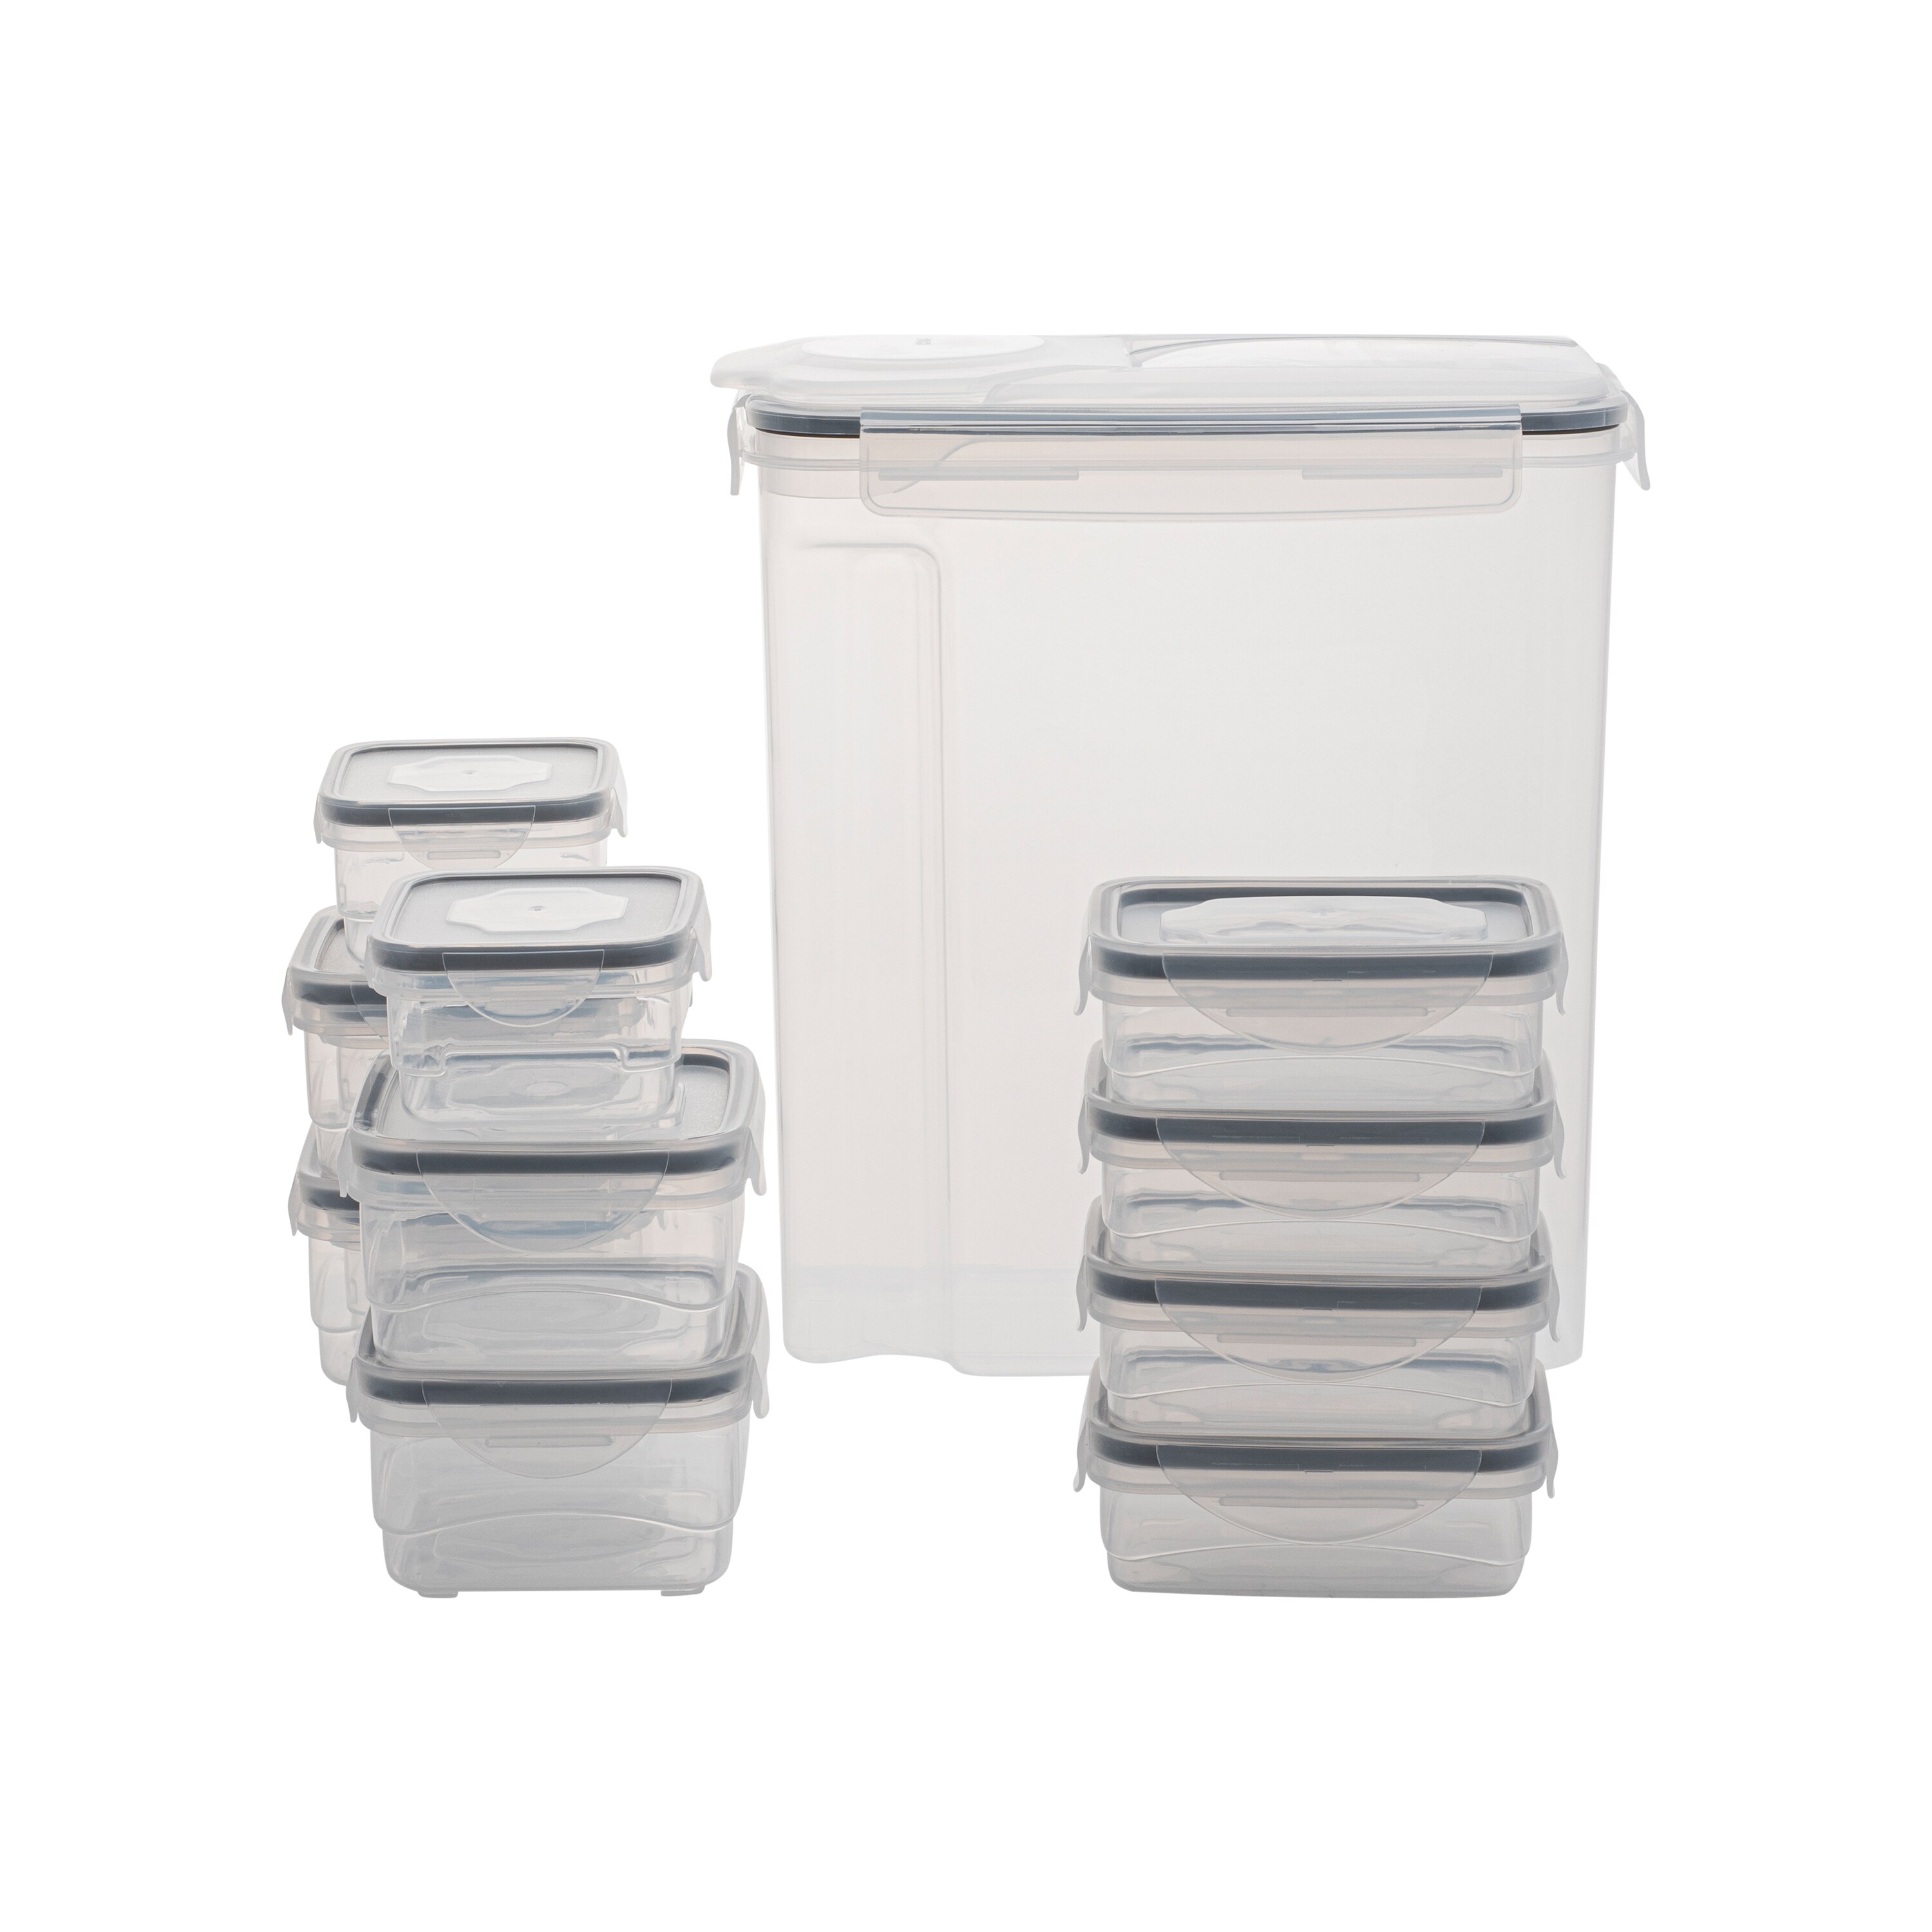 iDesign Multisize Plastic Bpa-free Reusable Food Storage Container in the Food  Storage Containers department at